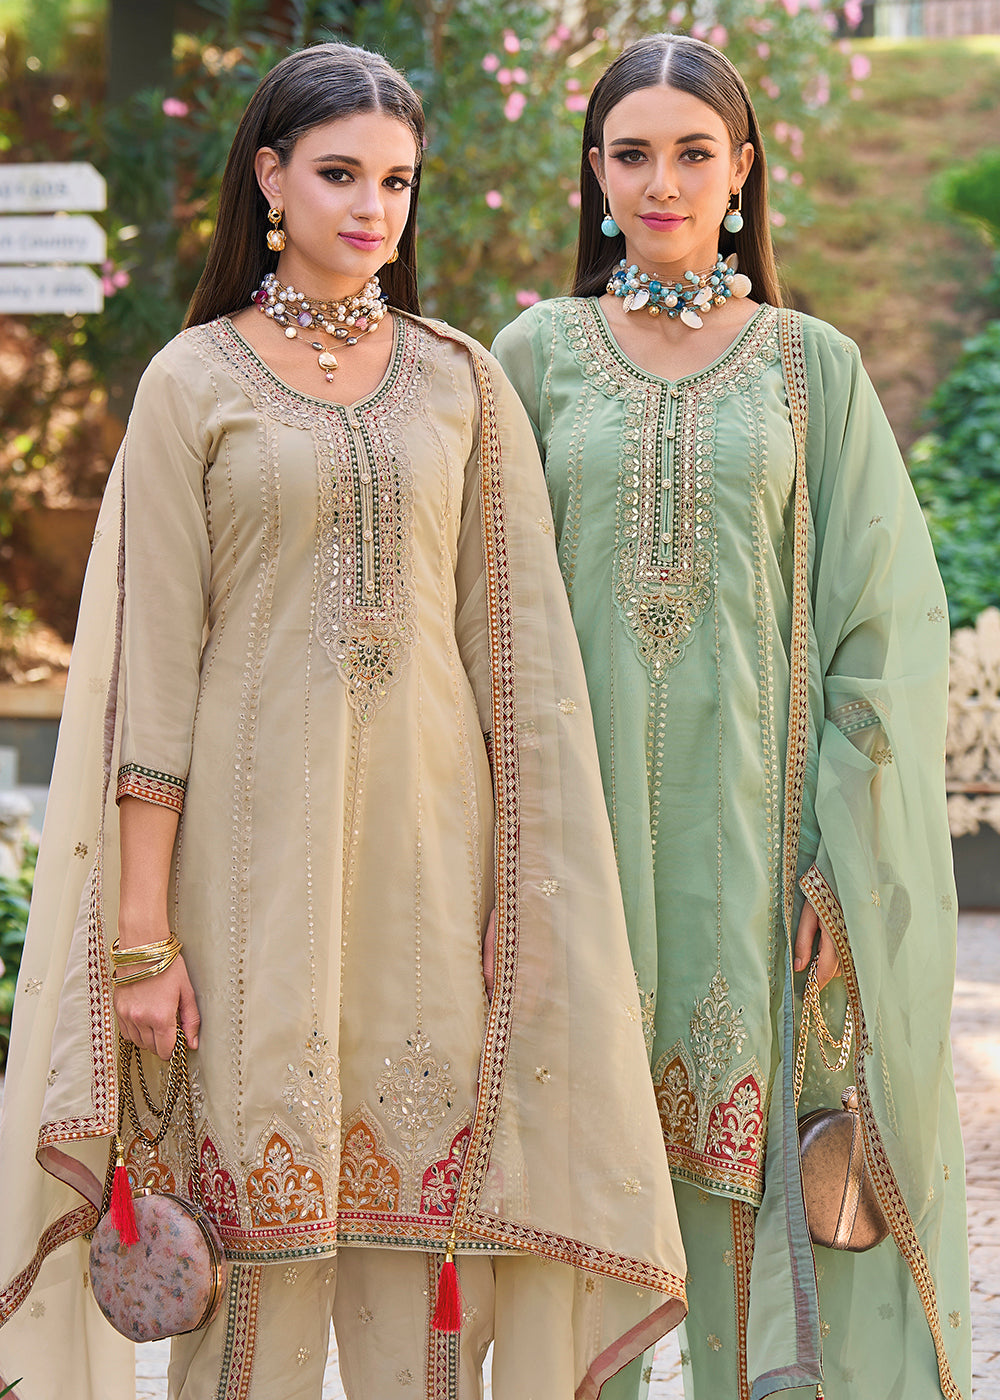 Buy Now Beige Dhoti Style Embroidered Organza Punjabi Style Suit Online in USA, UK, Canada, Germany, Australia & Worldwide at Empress Clothing. 